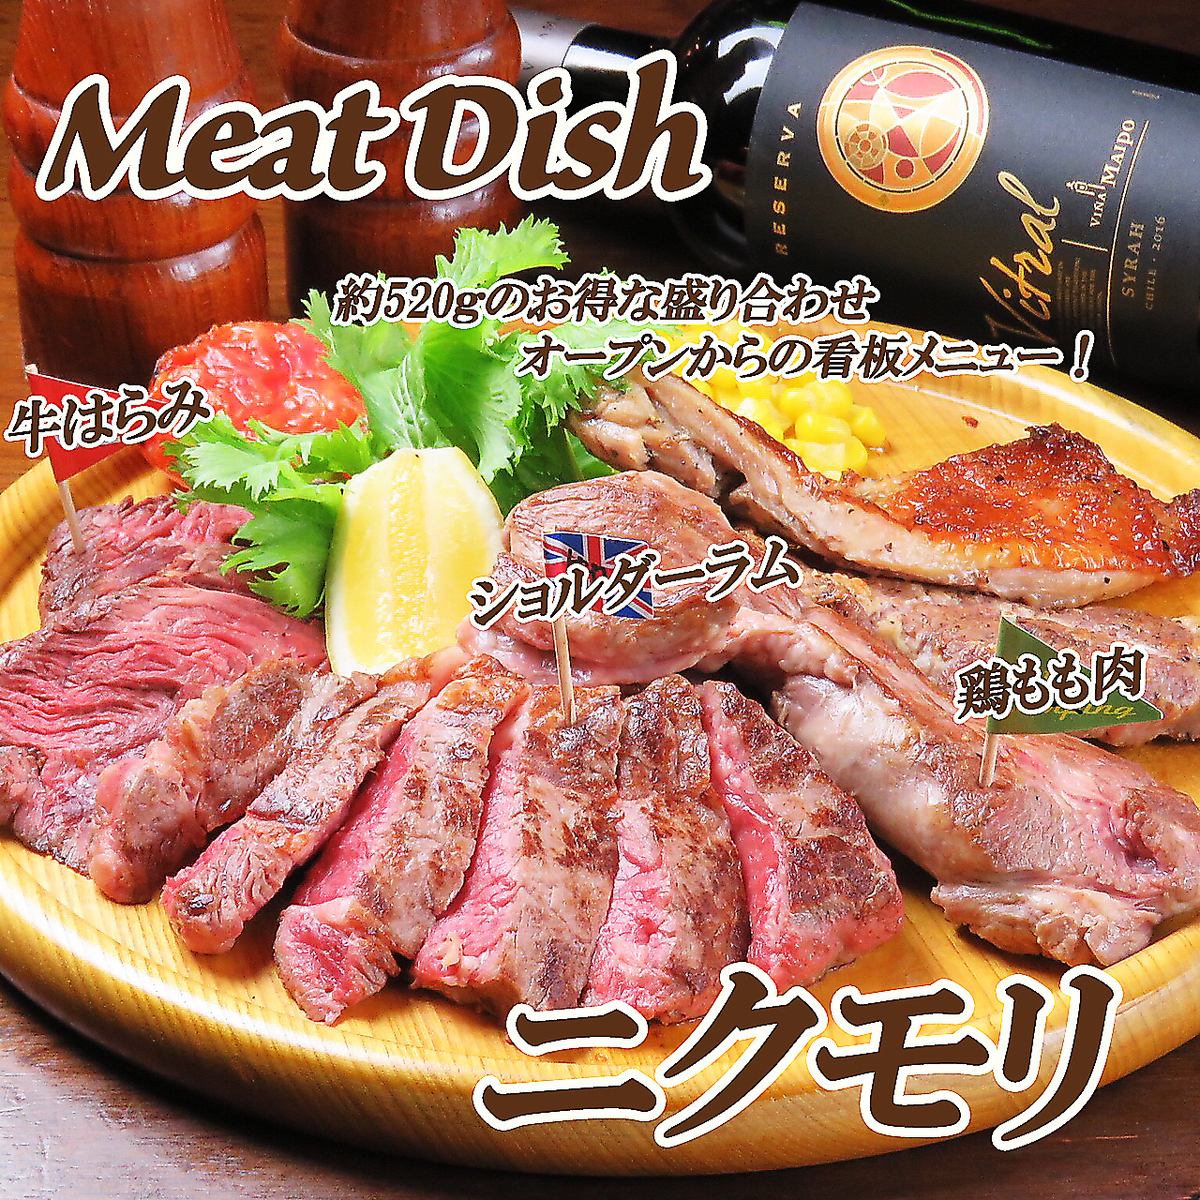 You can enjoy exquisite meat dishes unique to Euro29spiral ♪